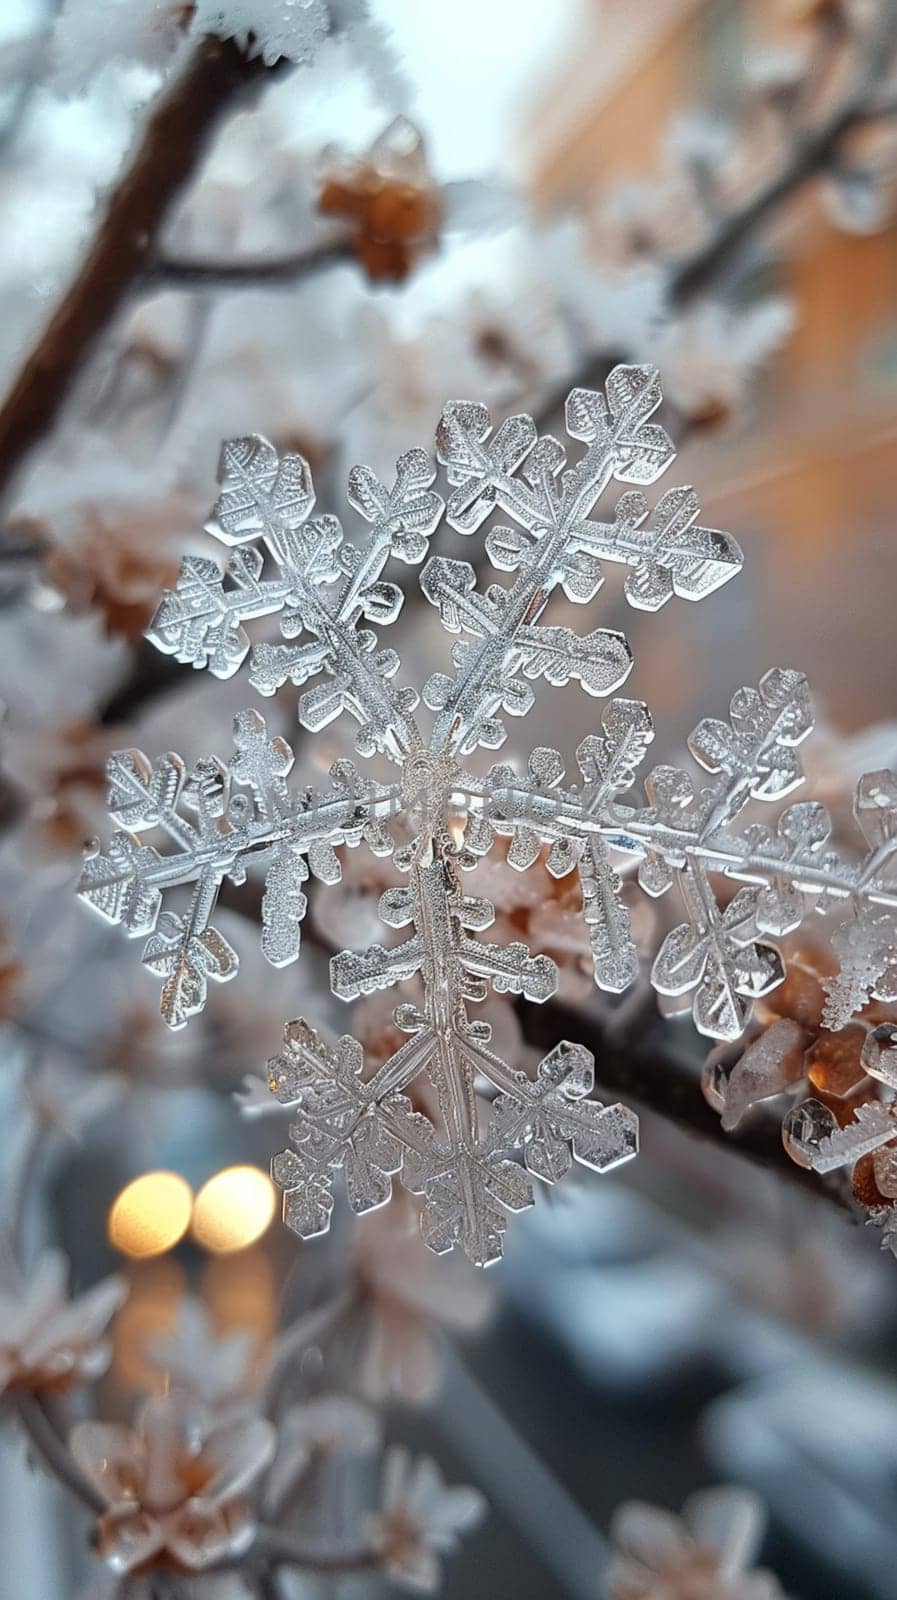 Icy snowflakes on a window pane, capturing the magic and tranquility of winter.